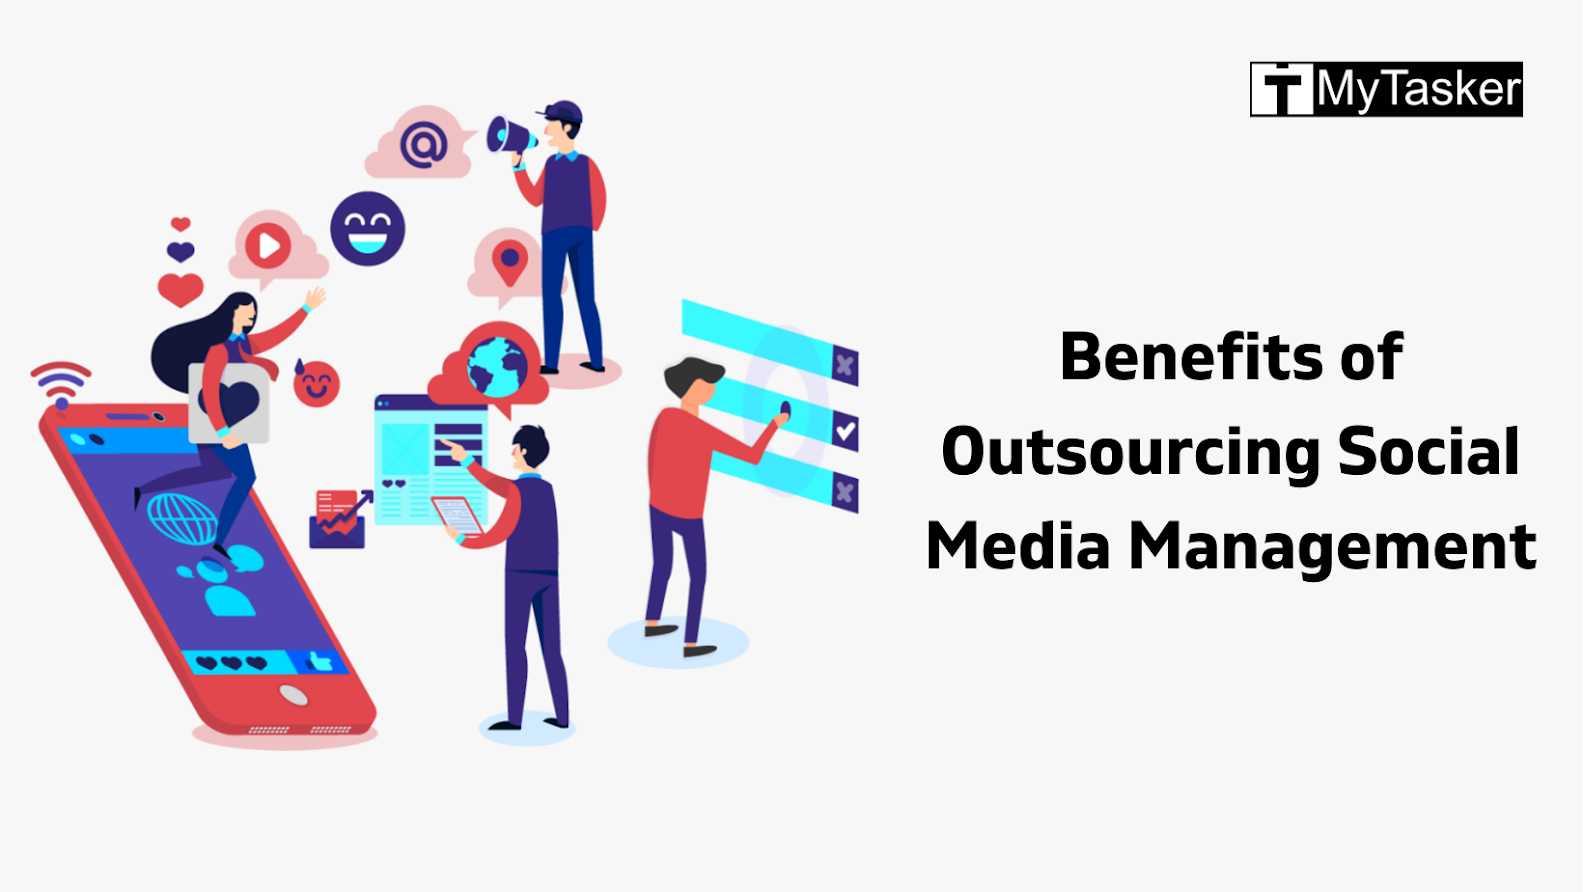 Benefits of Outsourcing Social Media Management